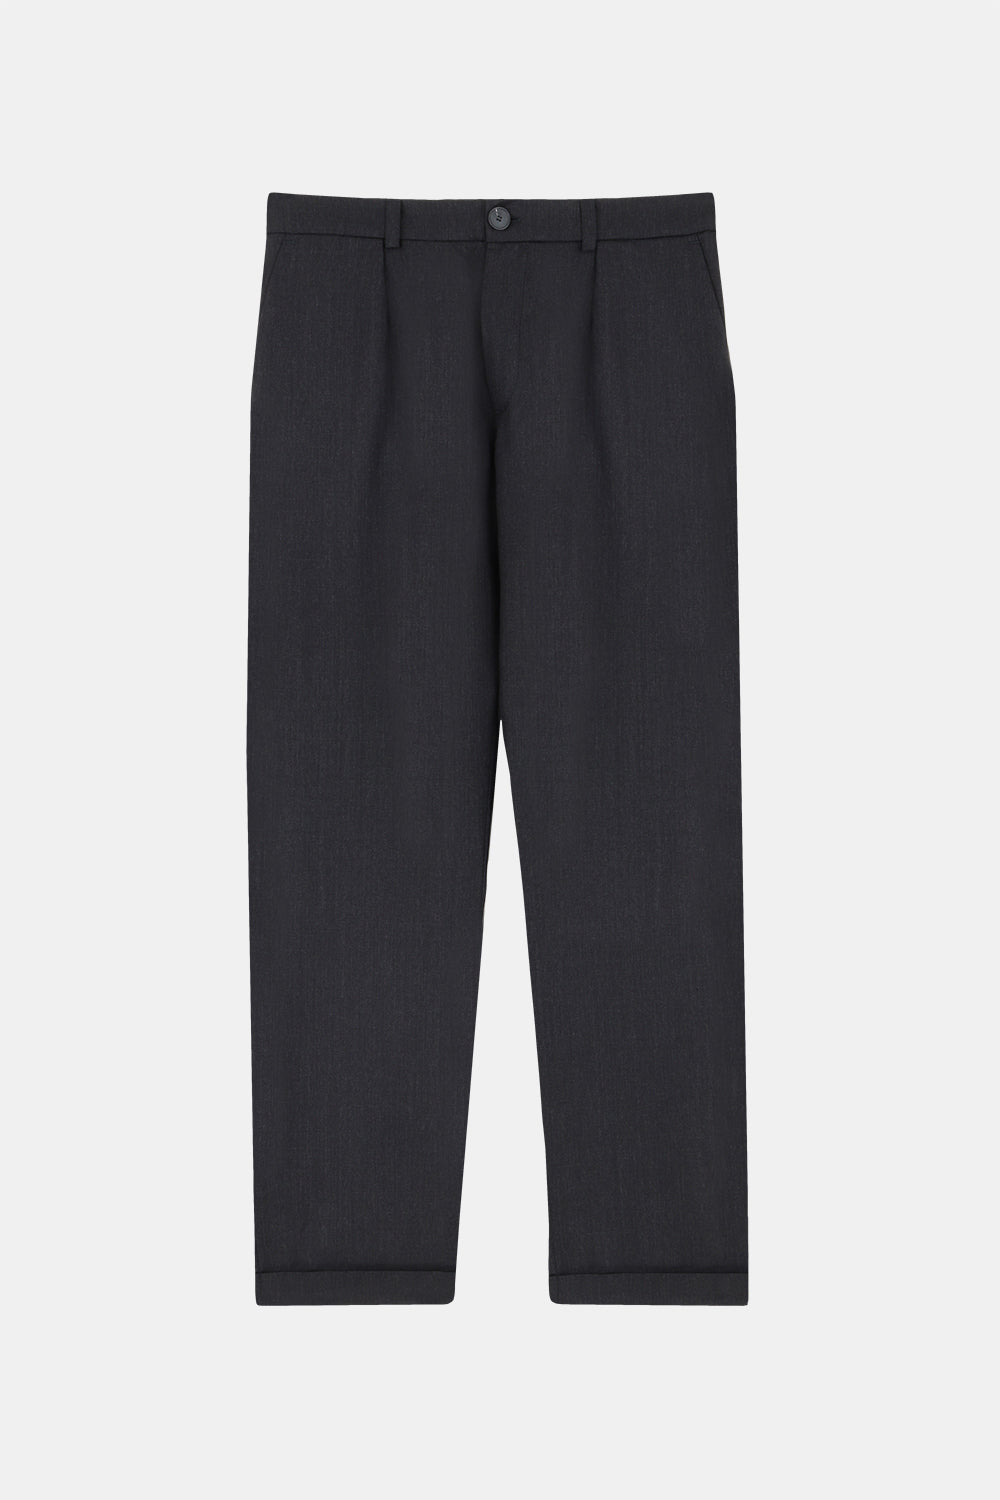 Sienna Tropical Wool Pant Anthracite